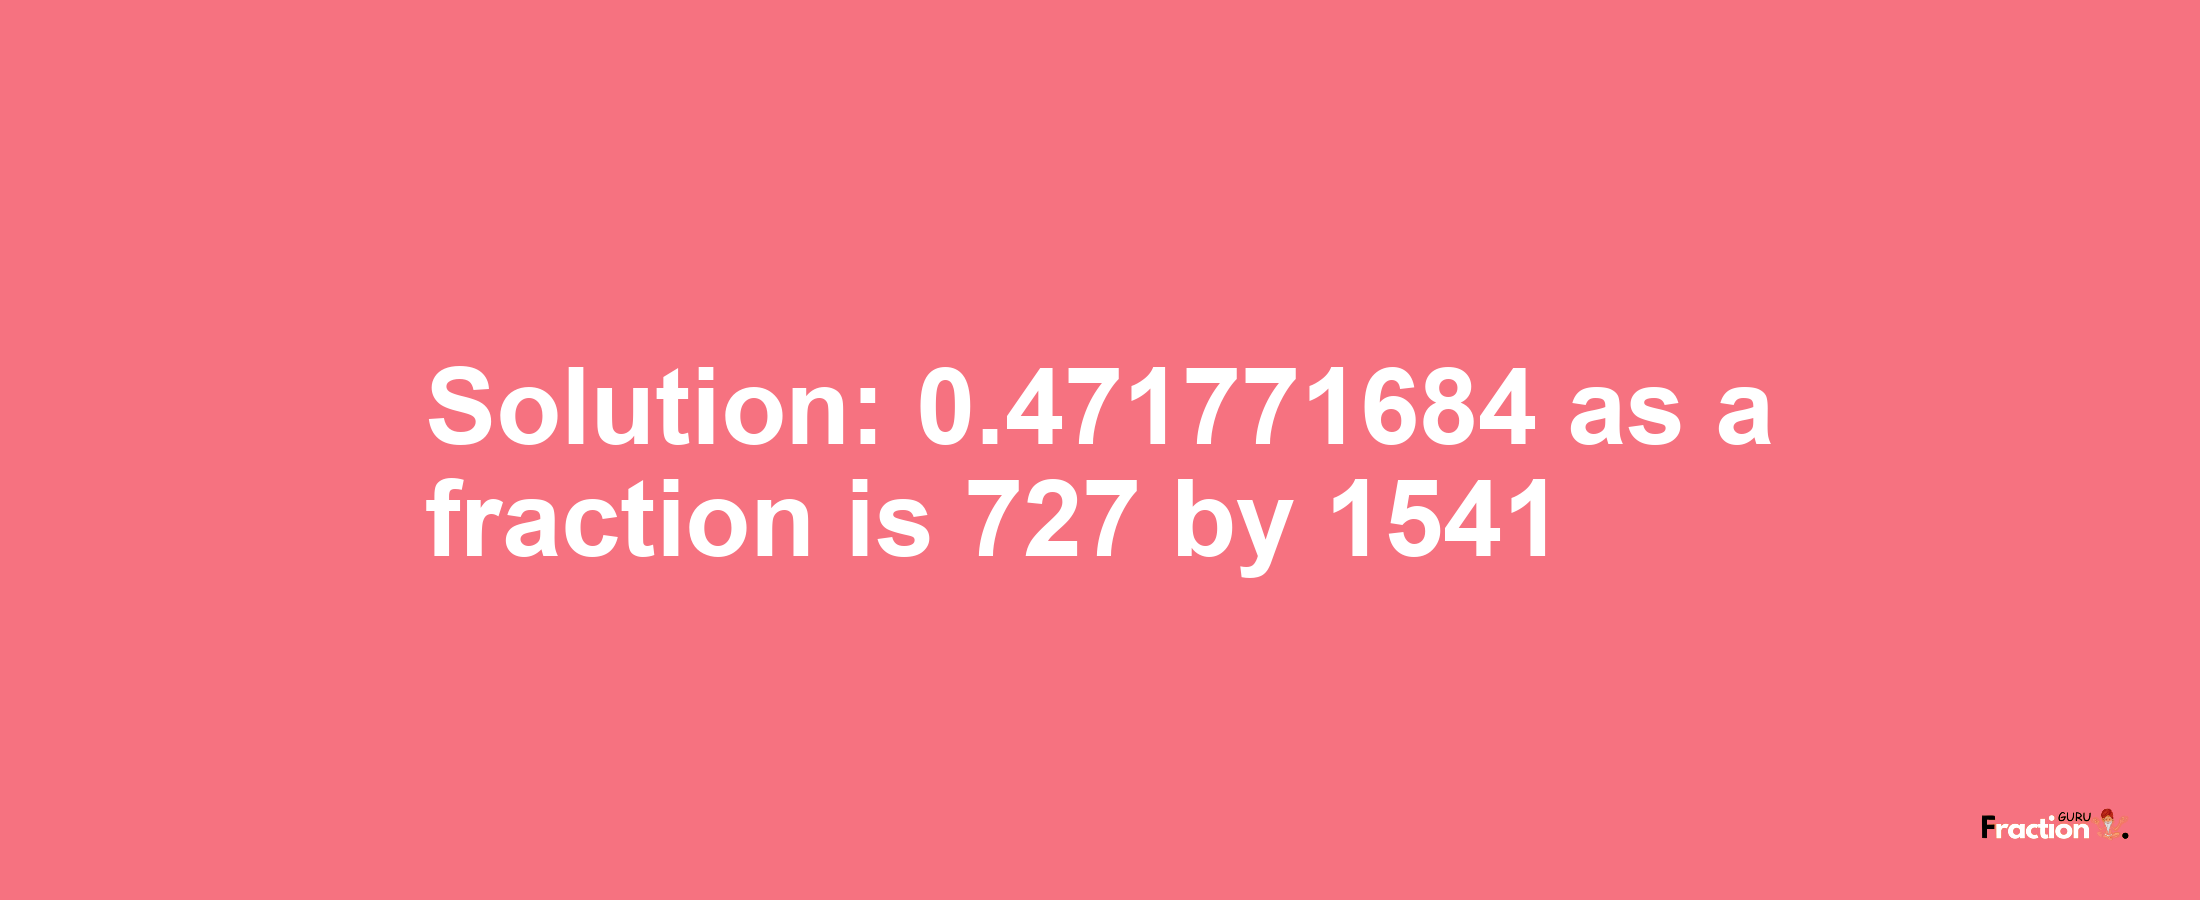 Solution:0.471771684 as a fraction is 727/1541